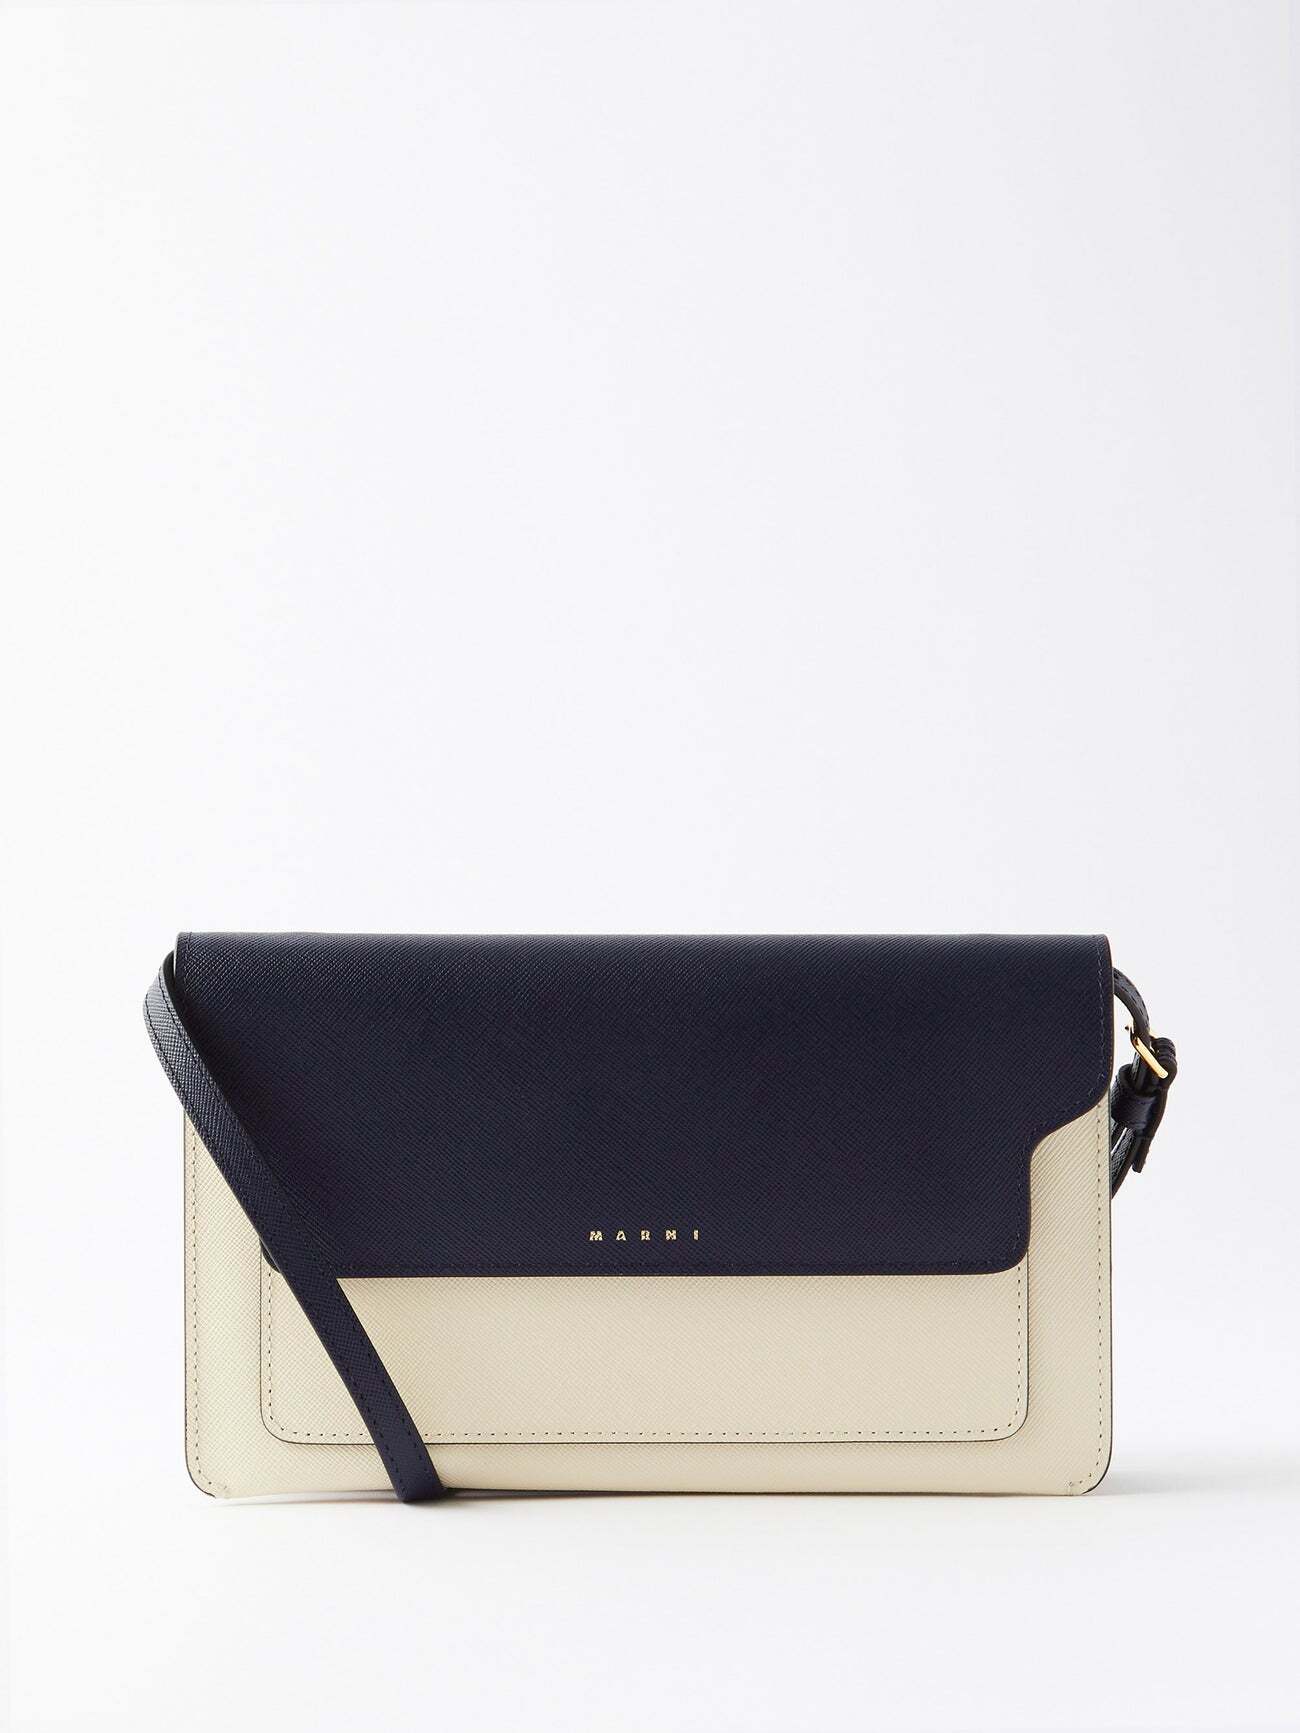 Marni - Trunk Saffiano Leather Cross-body Pouch - Womens - Navy White